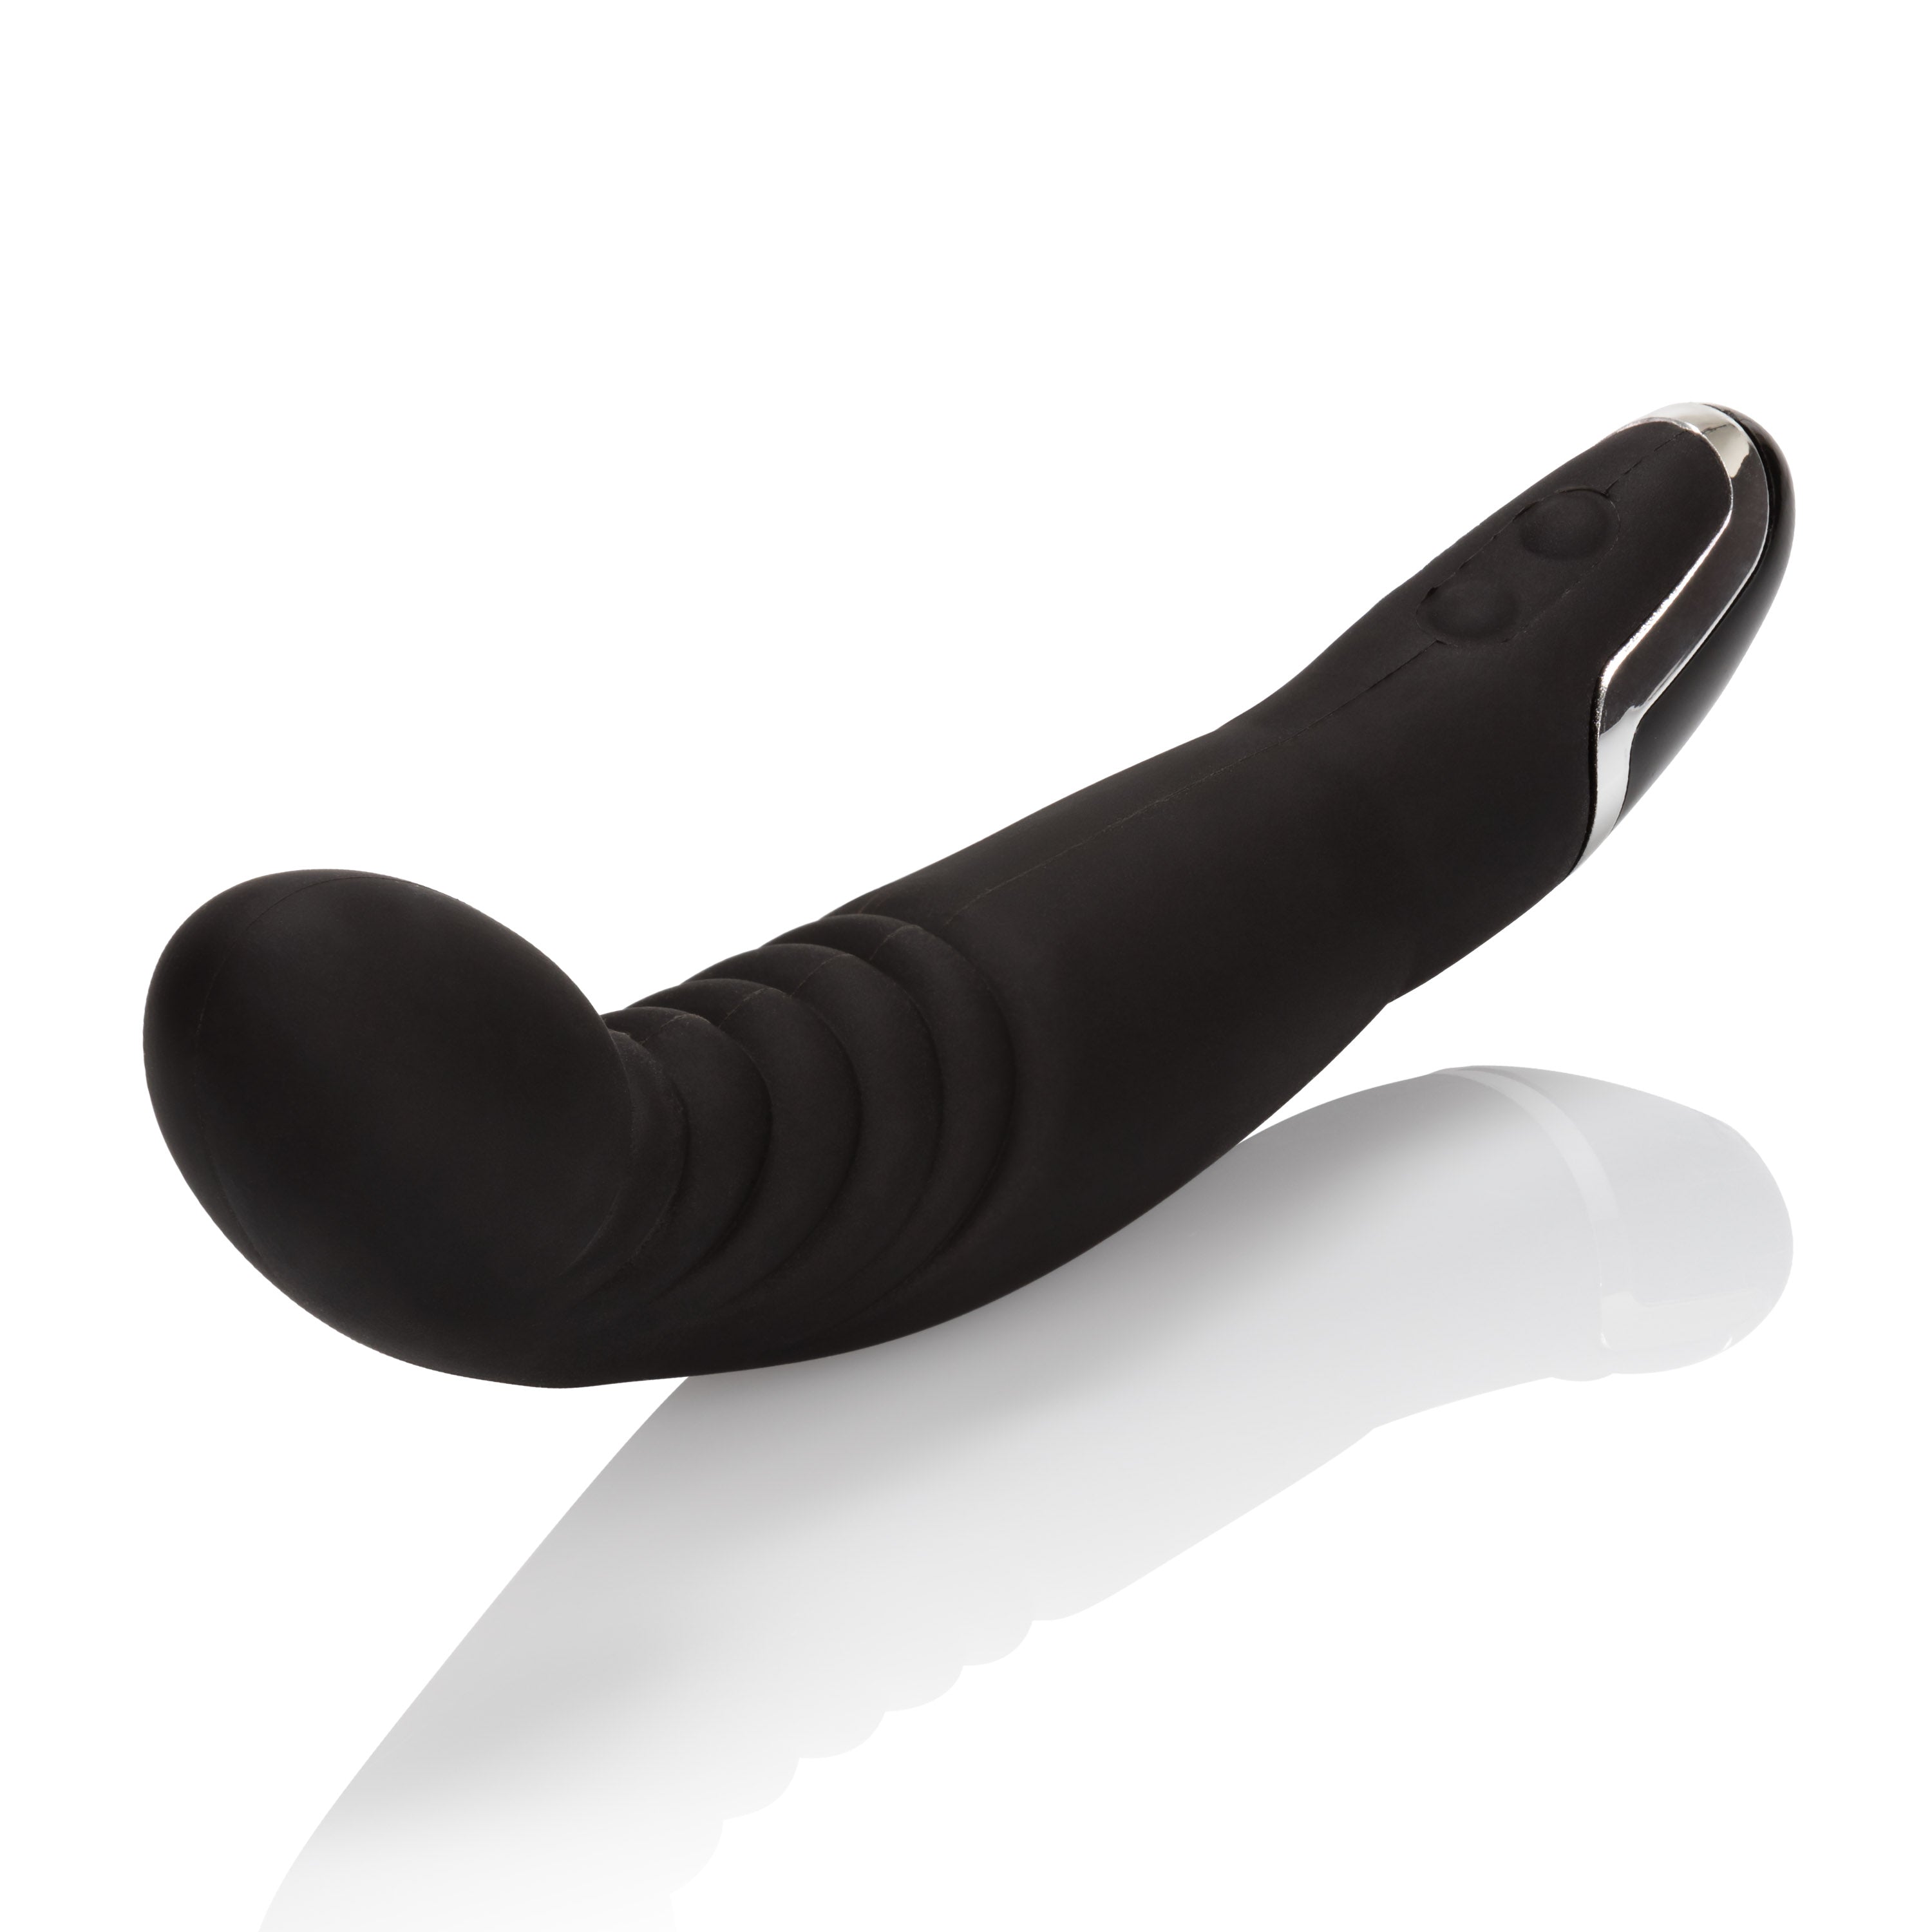 Dr. Joel Silicone Ridged Prostate Massager with 8 Functions